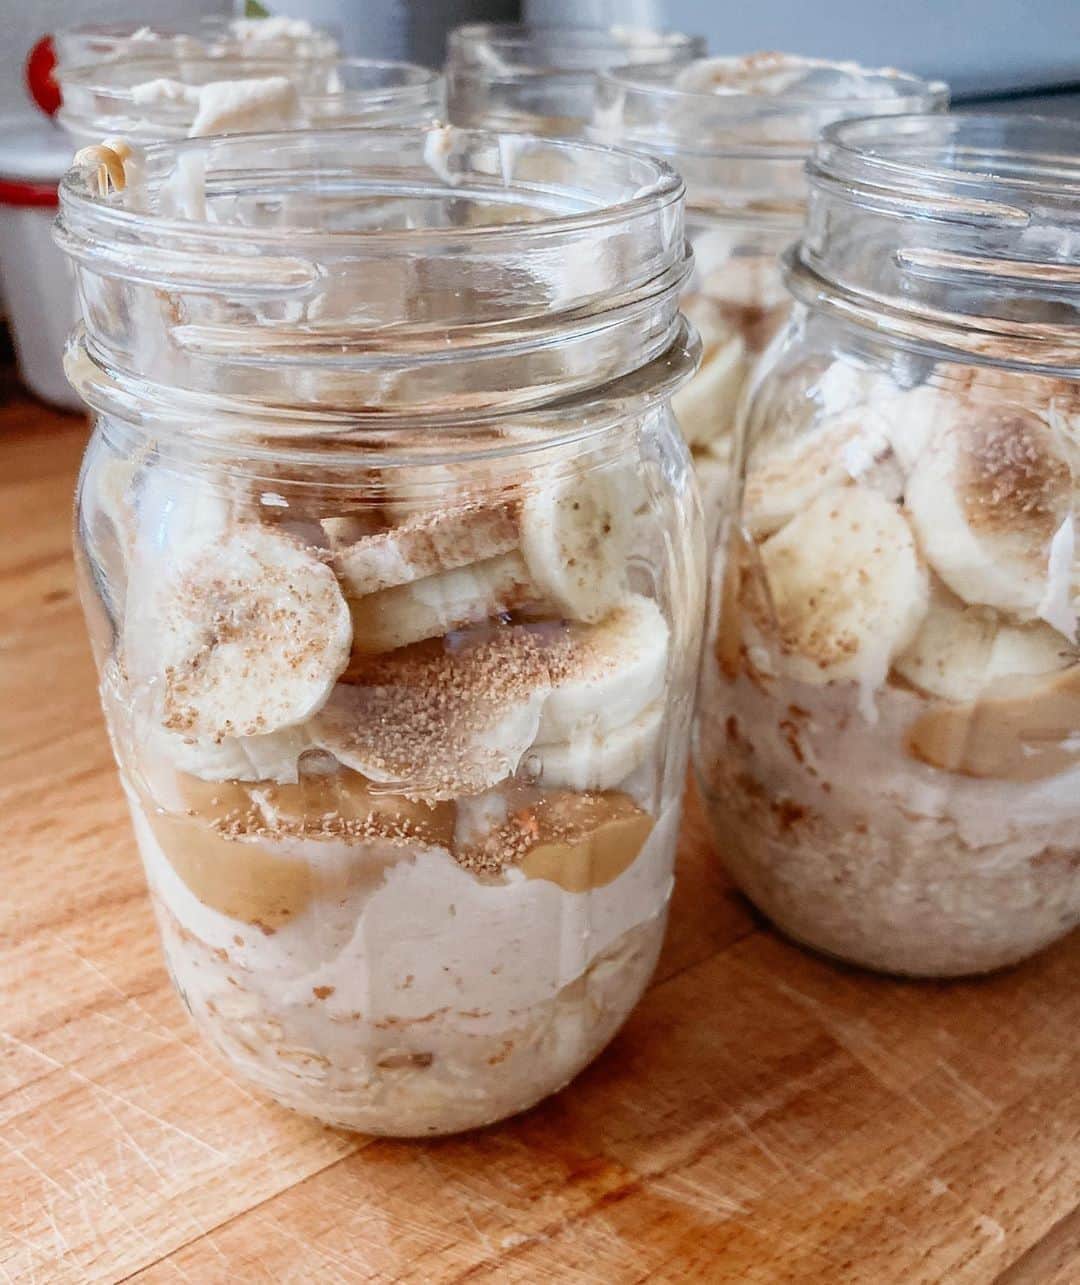 Flavorgod Seasoningsさんのインスタグラム写真 - (Flavorgod SeasoningsInstagram)「🥜🍫🍌Peanut butter, chocolate, banana overnight oats and yogurt bowls!⁠ -⁠ Customer:👉 @reneefindingherway⁠ Made with with:👉 #Flavorgod Chocolate Donut Toppper⁠ -⁠ Add delicious flavors to any meal!⬇⁠ Click the link in my bio @flavorgod⁠ ✅www.flavorgod.com⁠ -⁠ I used @sweetsavoryandsteph’s overnight oat base recipe and tweaked it a little to use the flavors I wanted with the ingredients I had on hand.⁠ •⁠ •⁠ Each jar has:⁠ ▪️1/3 cup oats mixed with 1/3 cup cashew milk and 1tsp @flavorgod Chocolate Donut Seasoning⁠ ▪️1/2 cup NF Greek yogurt mixed with 1/2 scoop @WW vanilla protein powder and 1tsp of chocolate donut seasoning (yes, again)⁠ ▪️15g @americandreamnutbutter Butter My Cup⁠ ▪️Sliced banana with a sprinkle of chocolate donut seasoning⁠ •⁠ I layered everything in the jar as listed above. They keep in the fridge for a week...even the banana...I’ve never had a problem.⁠ •⁠ 💜3SP⁠ 💙6SP⁠ 💚7SP⁠ -⁠ Flavor God Seasonings are:⁠ 🍩ZERO CALORIES PER SERVING🍩⁠ 🍩MADE FRESH⁠ 🍩MADE LOCALLY IN US⁠ 🍩FREE GIFTS AT CHECKOUT⁠ 🍩GLUTEN FREE⁠ 🍩#PALEO & #KETO FRIENDLY⁠ -⁠ #food #foodie #flavorgod #seasonings #glutenfree #mealprep #seasonings #breakfast #lunch #dinner #yummy #delicious #foodporn」8月26日 21時01分 - flavorgod